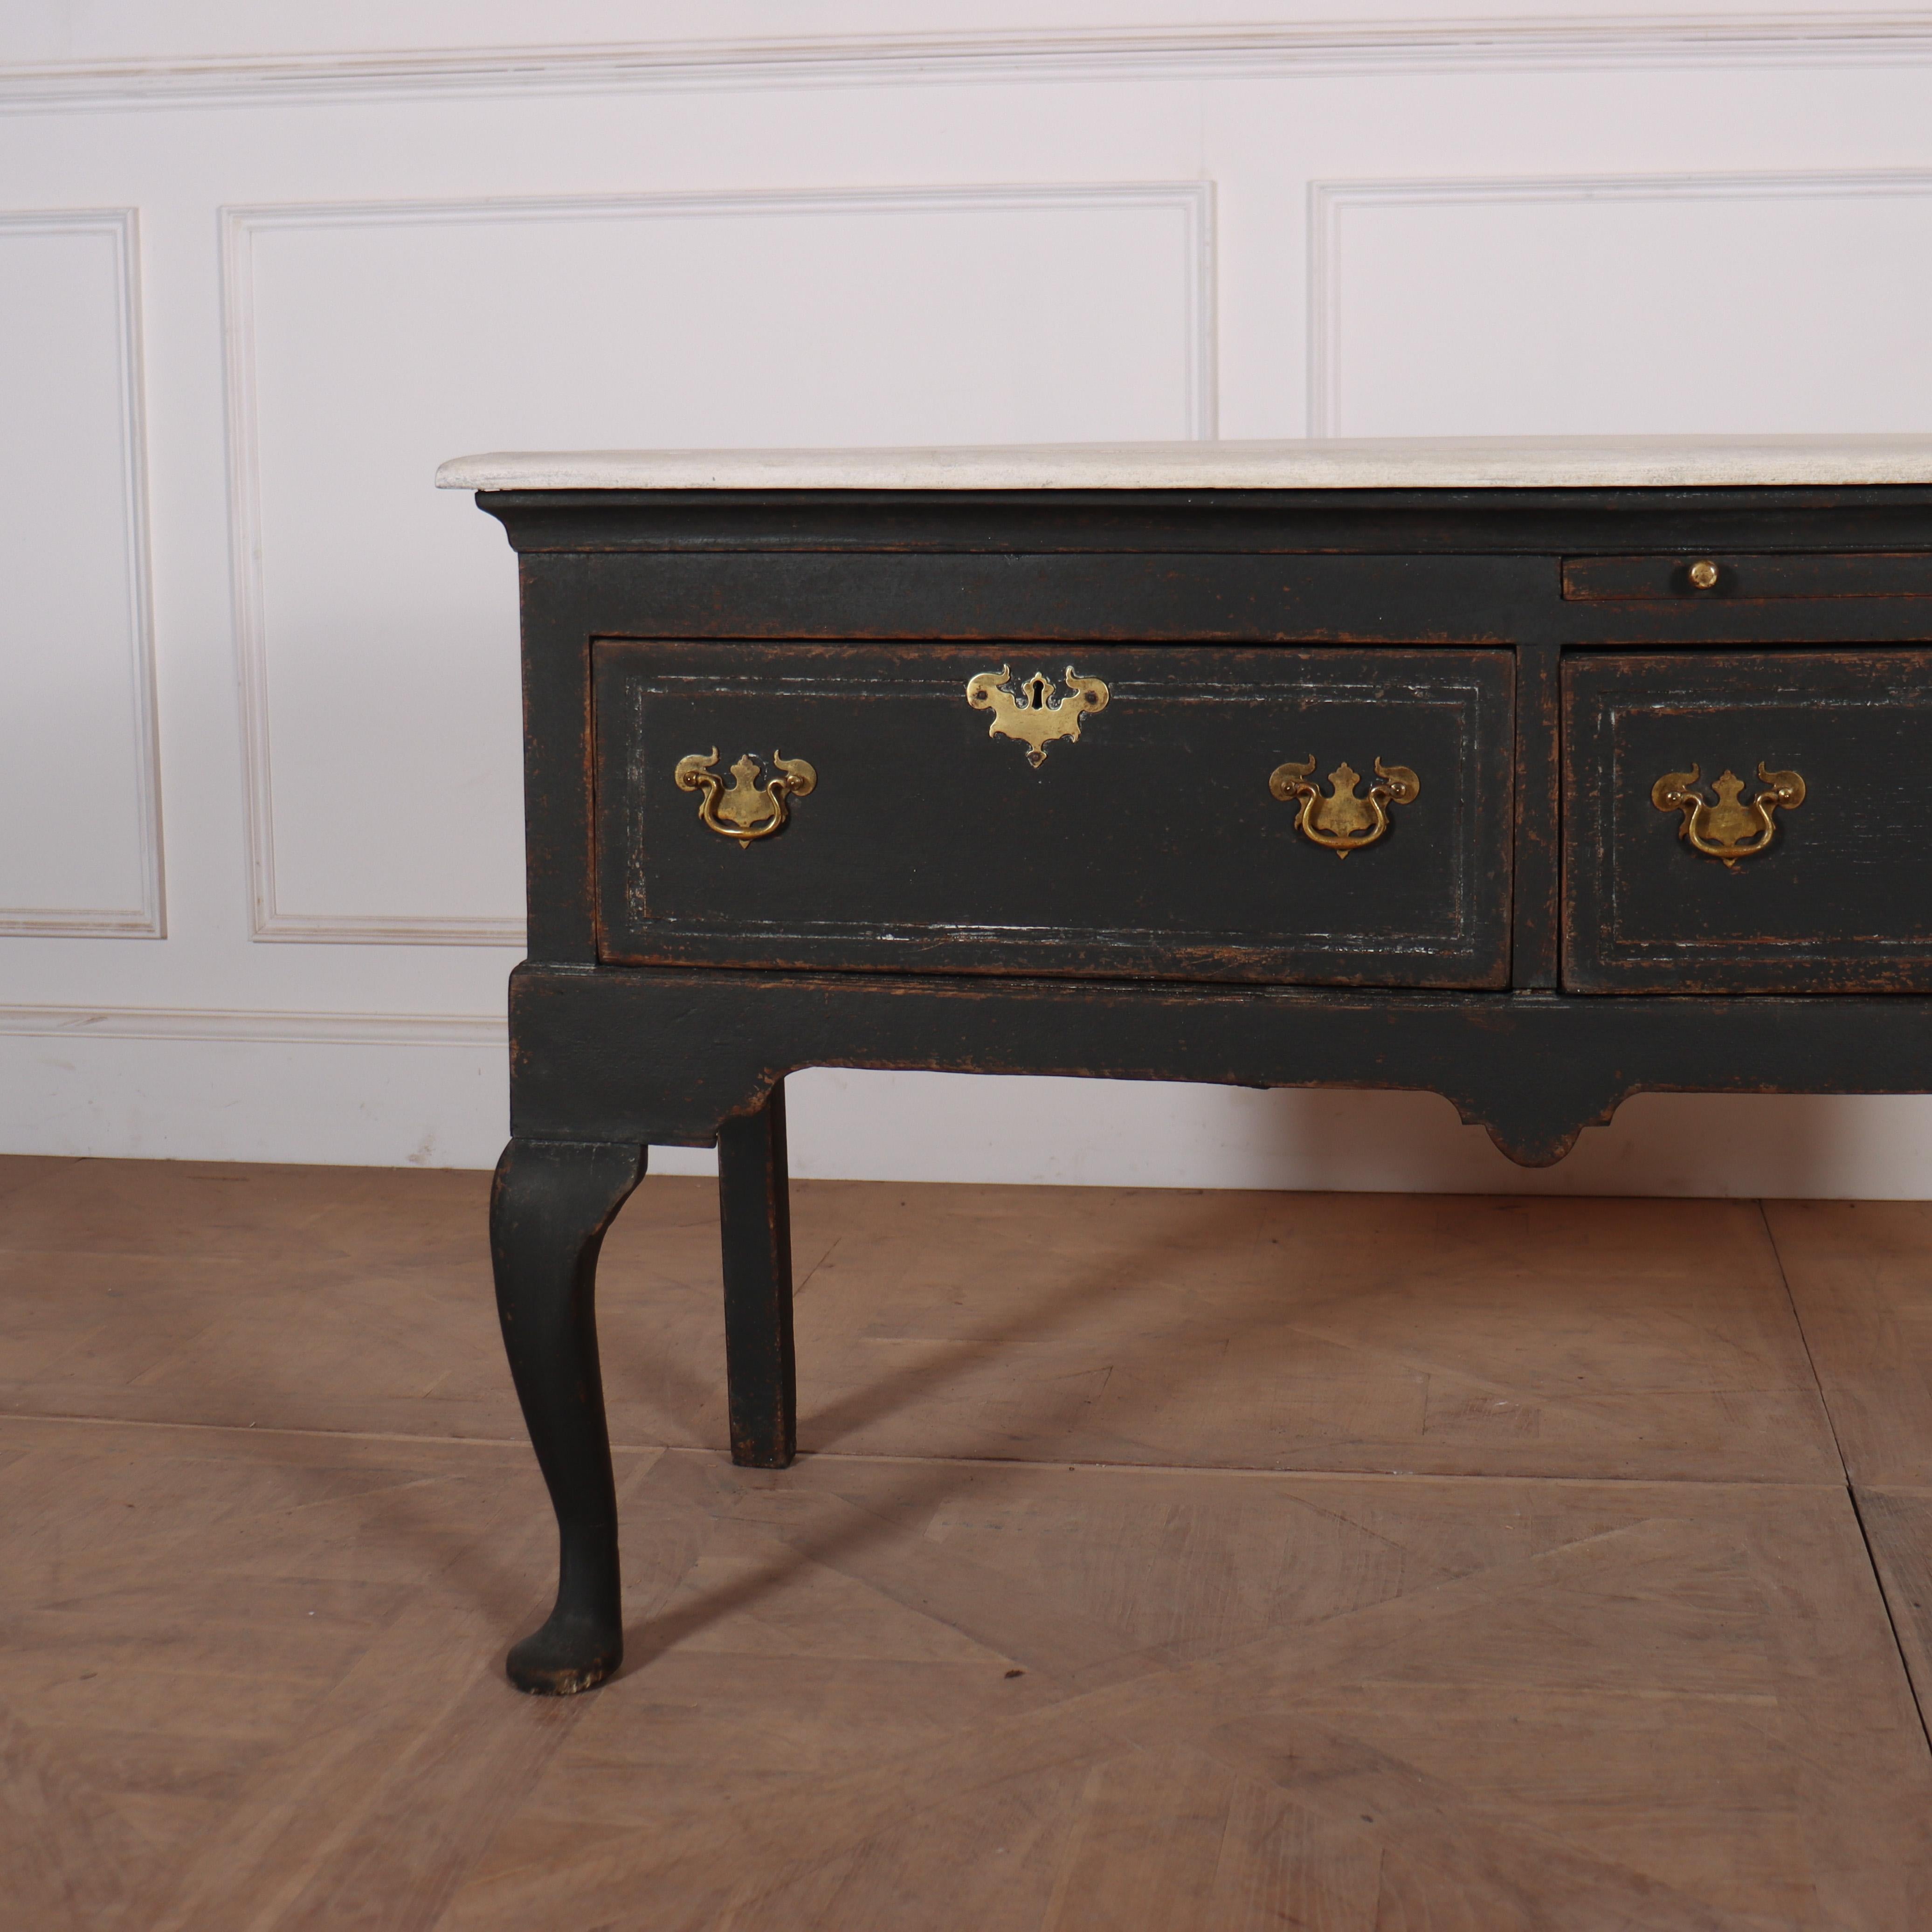 Quirky two drawer 18th C English painted oak dresser base with cabriole legs. 1760.



Dimensions
52 inches (132 cms) Wide
21 inches (53 cms) Deep
31 inches (79 cms) High.